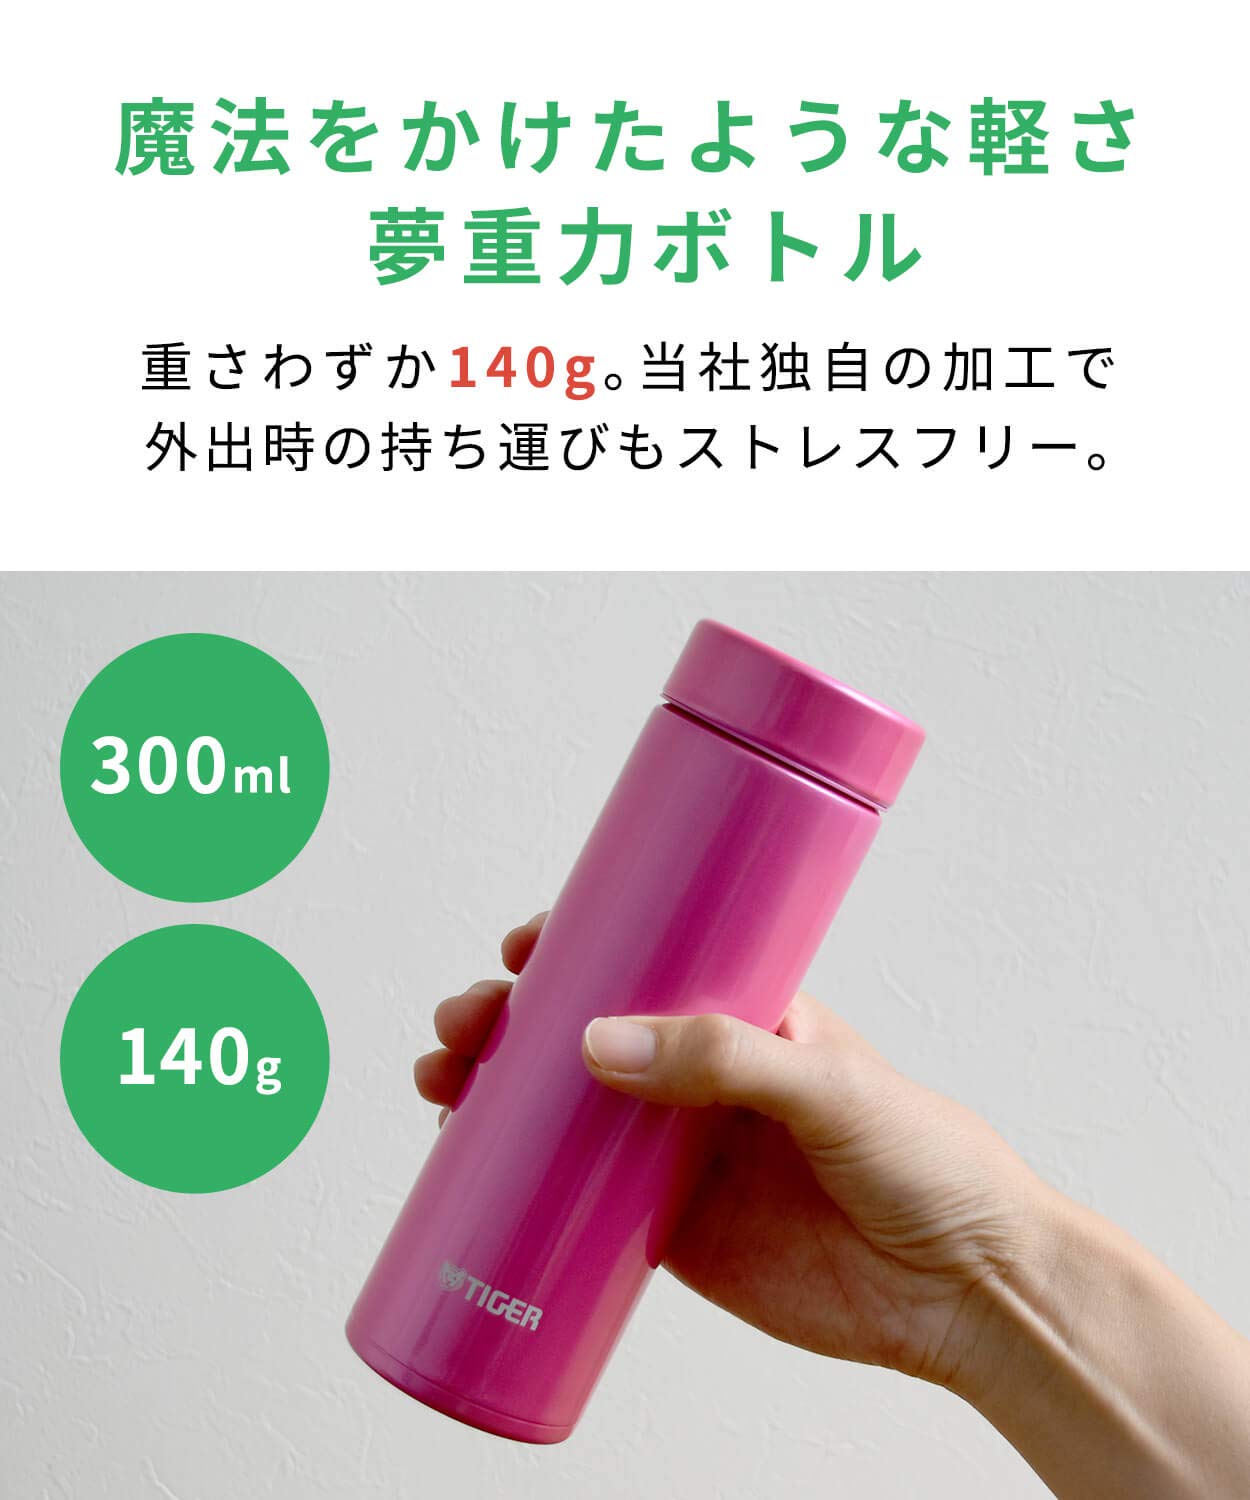 Tiger Thermos Water Bottle 6H Warm/Cold 300ml MMP-J030PP Pink